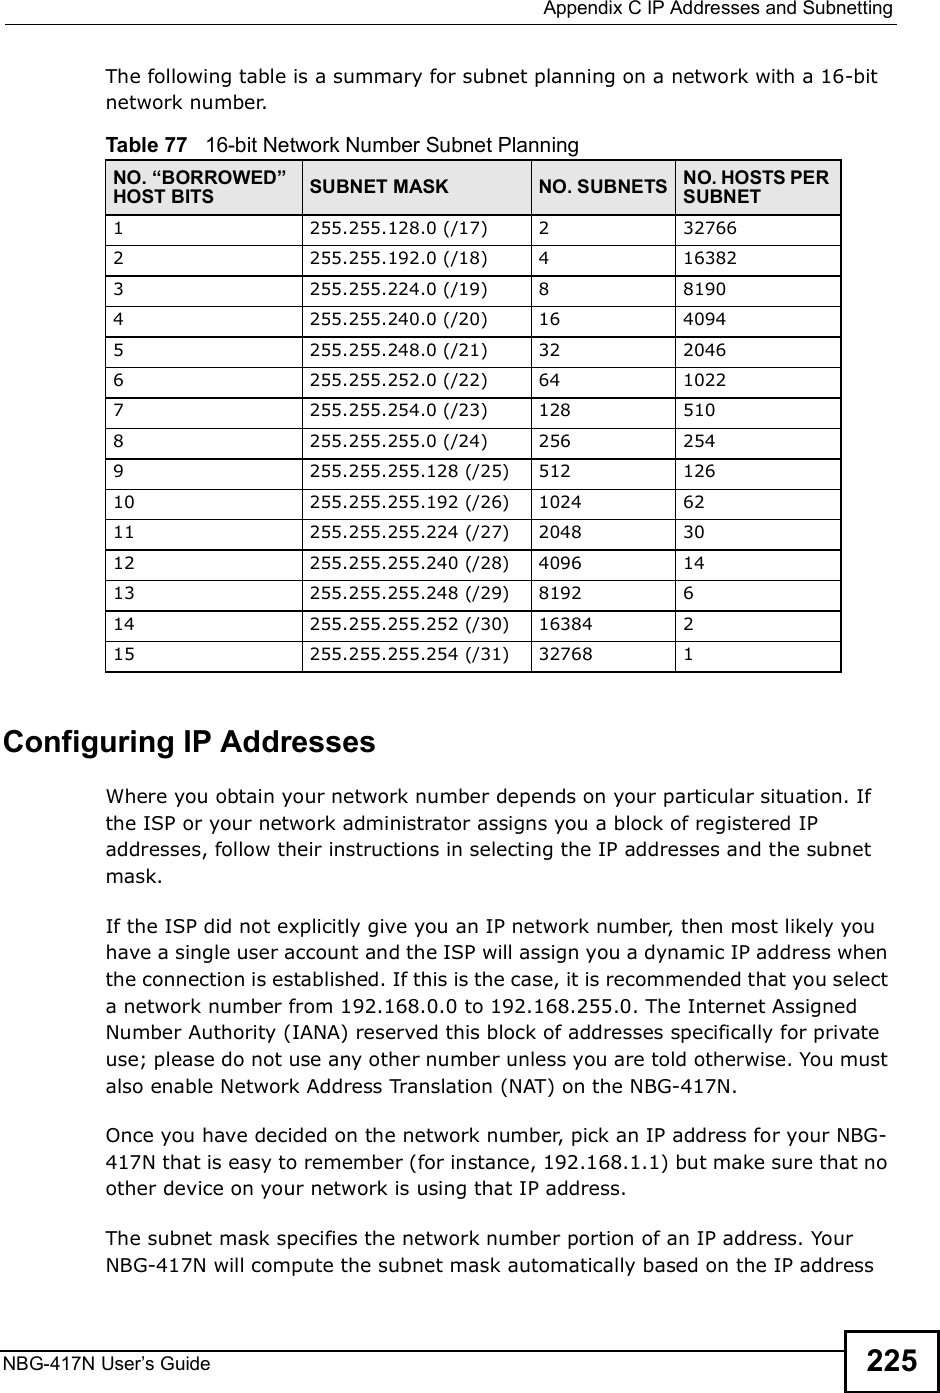  Appendix CIP Addresses and SubnettingNBG-417N User s Guide 225The following table is a summary for subnet planning on a network with a 16-bit network number. Configuring IP AddressesWhere you obtain your network number depends on your particular situation. If the ISP or your network administrator assigns you a block of registered IP addresses, follow their instructions in selecting the IP addresses and the subnet mask.If the ISP did not explicitly give you an IP network number, then most likely you have a single user account and the ISP will assign you a dynamic IP address when the connection is established. If this is the case, it is recommended that you select a network number from 192.168.0.0 to 192.168.255.0. The Internet Assigned Number Authority (IANA) reserved this block of addresses specifically for private use; please do not use any other number unless you are told otherwise. You must also enable Network Address Translation (NAT) on the NBG-417N. Once you have decided on the network number, pick an IP address for your NBG-417N that is easy to remember (for instance, 192.168.1.1) but make sure that no other device on your network is using that IP address.The subnet mask specifies the network number portion of an IP address. Your NBG-417N will compute the subnet mask automatically based on the IP address Table 77   16-bit Network Number Subnet PlanningNO. !BORROWED&quot; HOST BITS SUBNET MASK NO. SUBNETS NO. HOSTS PER SUBNET1255.255.128.0 (/17) 2 327662 255.255.192.0 (/18) 4 163823 255.255.224.0 (/19) 8 81904255.255.240.0 (/20) 16 40945255.255.248.0 (/21) 32 20466255.255.252.0 (/22) 64 10227255.255.254.0 (/23) 128 5108 255.255.255.0 (/24) 256 2549 255.255.255.128 (/25) 512 12610 255.255.255.192 (/26) 1024 6211 255.255.255.224 (/27) 2048 3012 255.255.255.240 (/28) 4096 1413 255.255.255.248 (/29) 8192 614 255.255.255.252 (/30) 16384 215 255.255.255.254 (/31) 32768 1